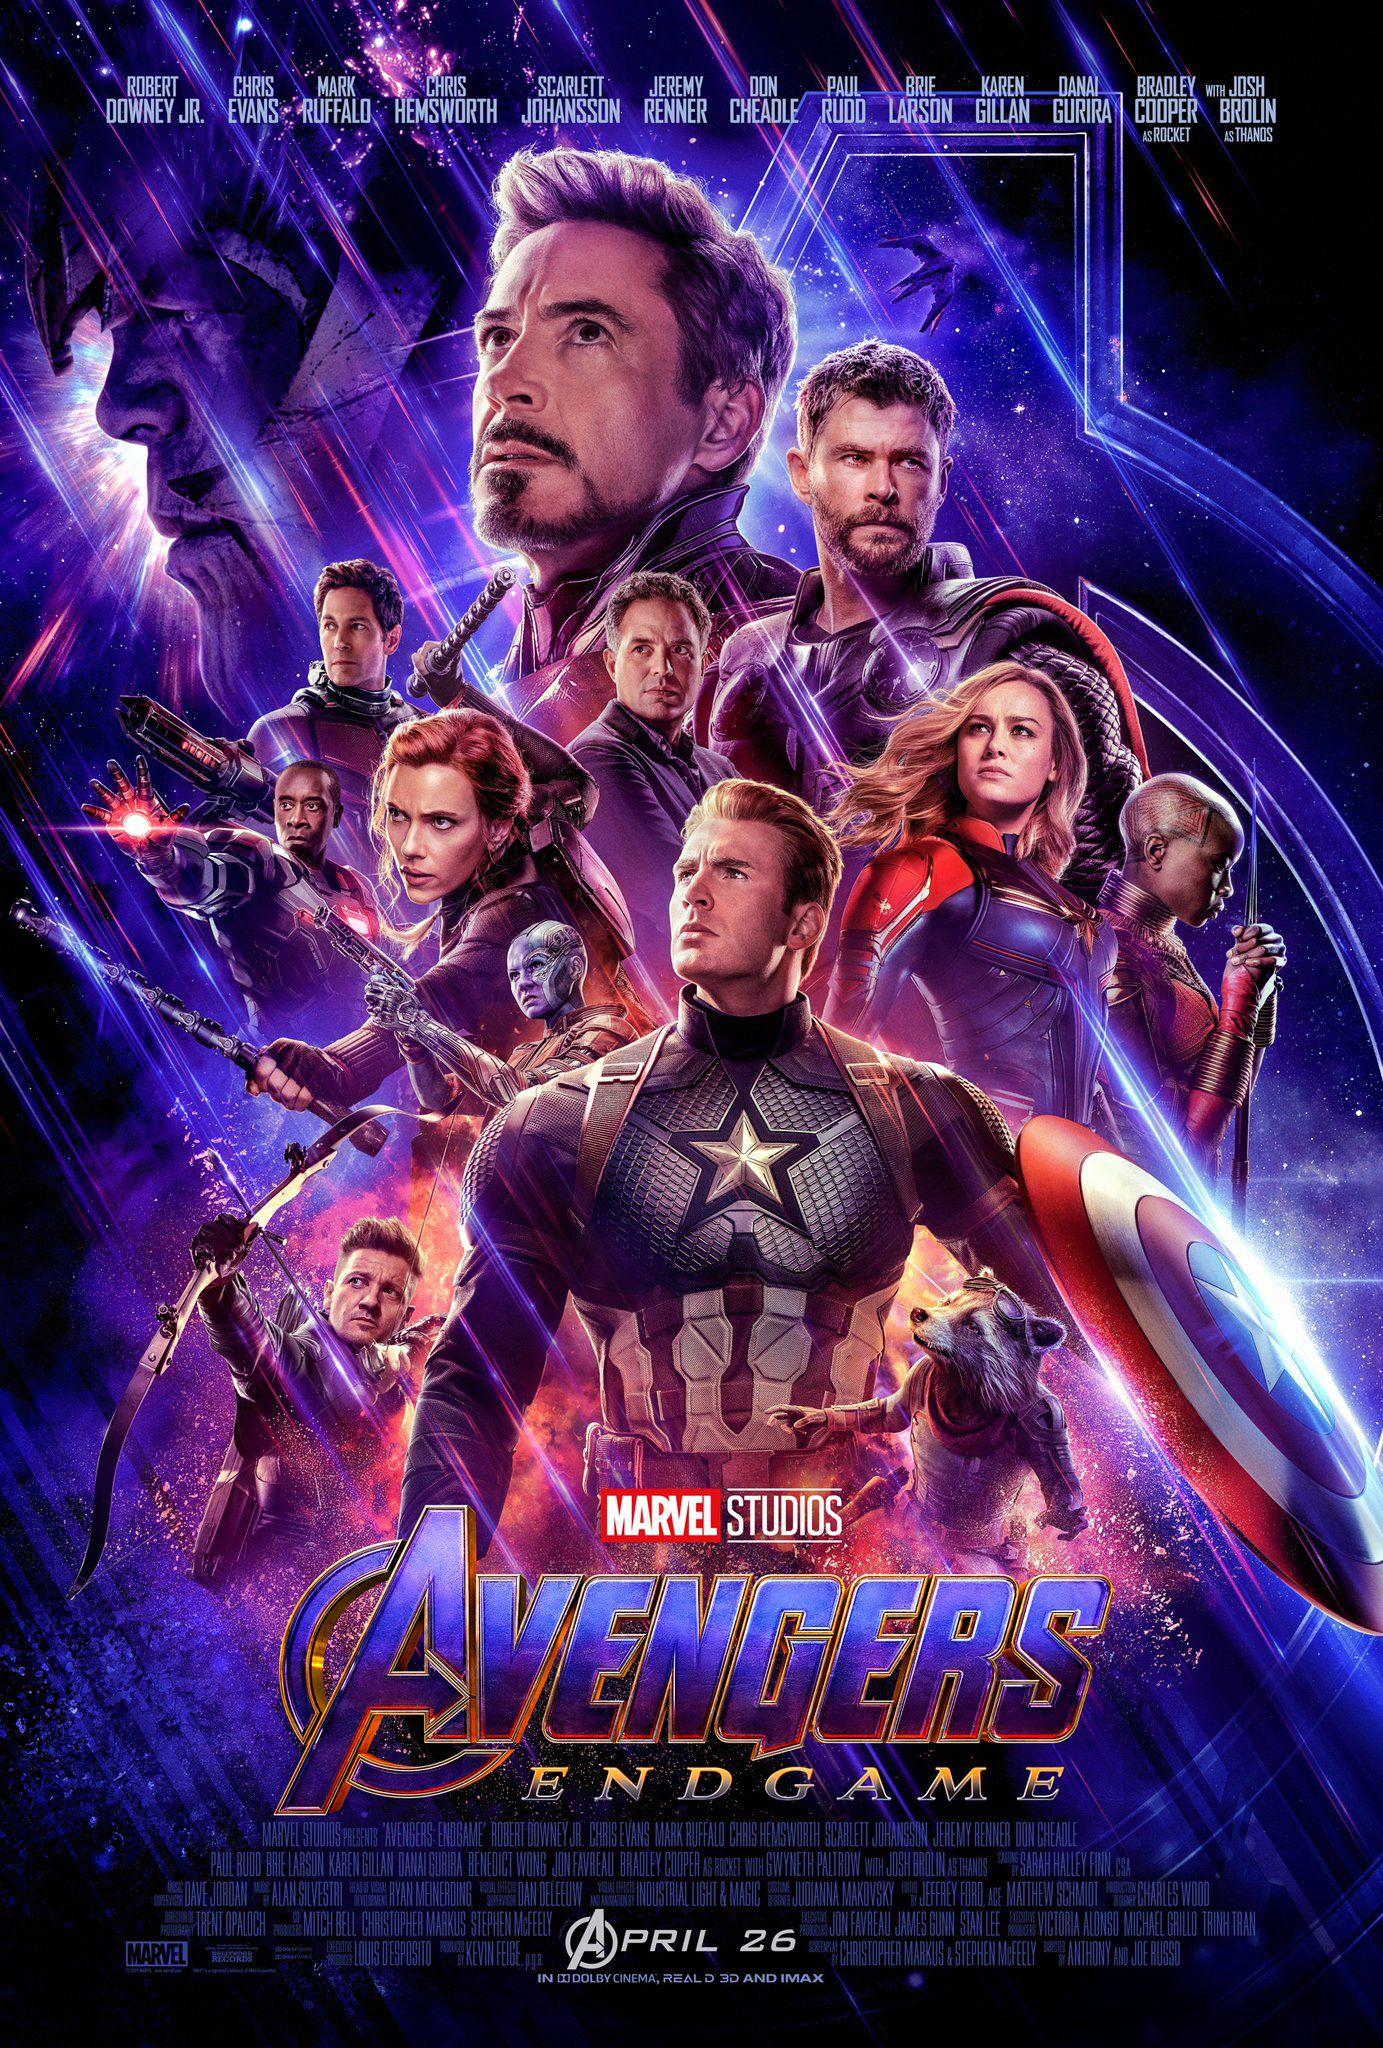 Avengers: Endgame Poster Controversy Changed the Avengers